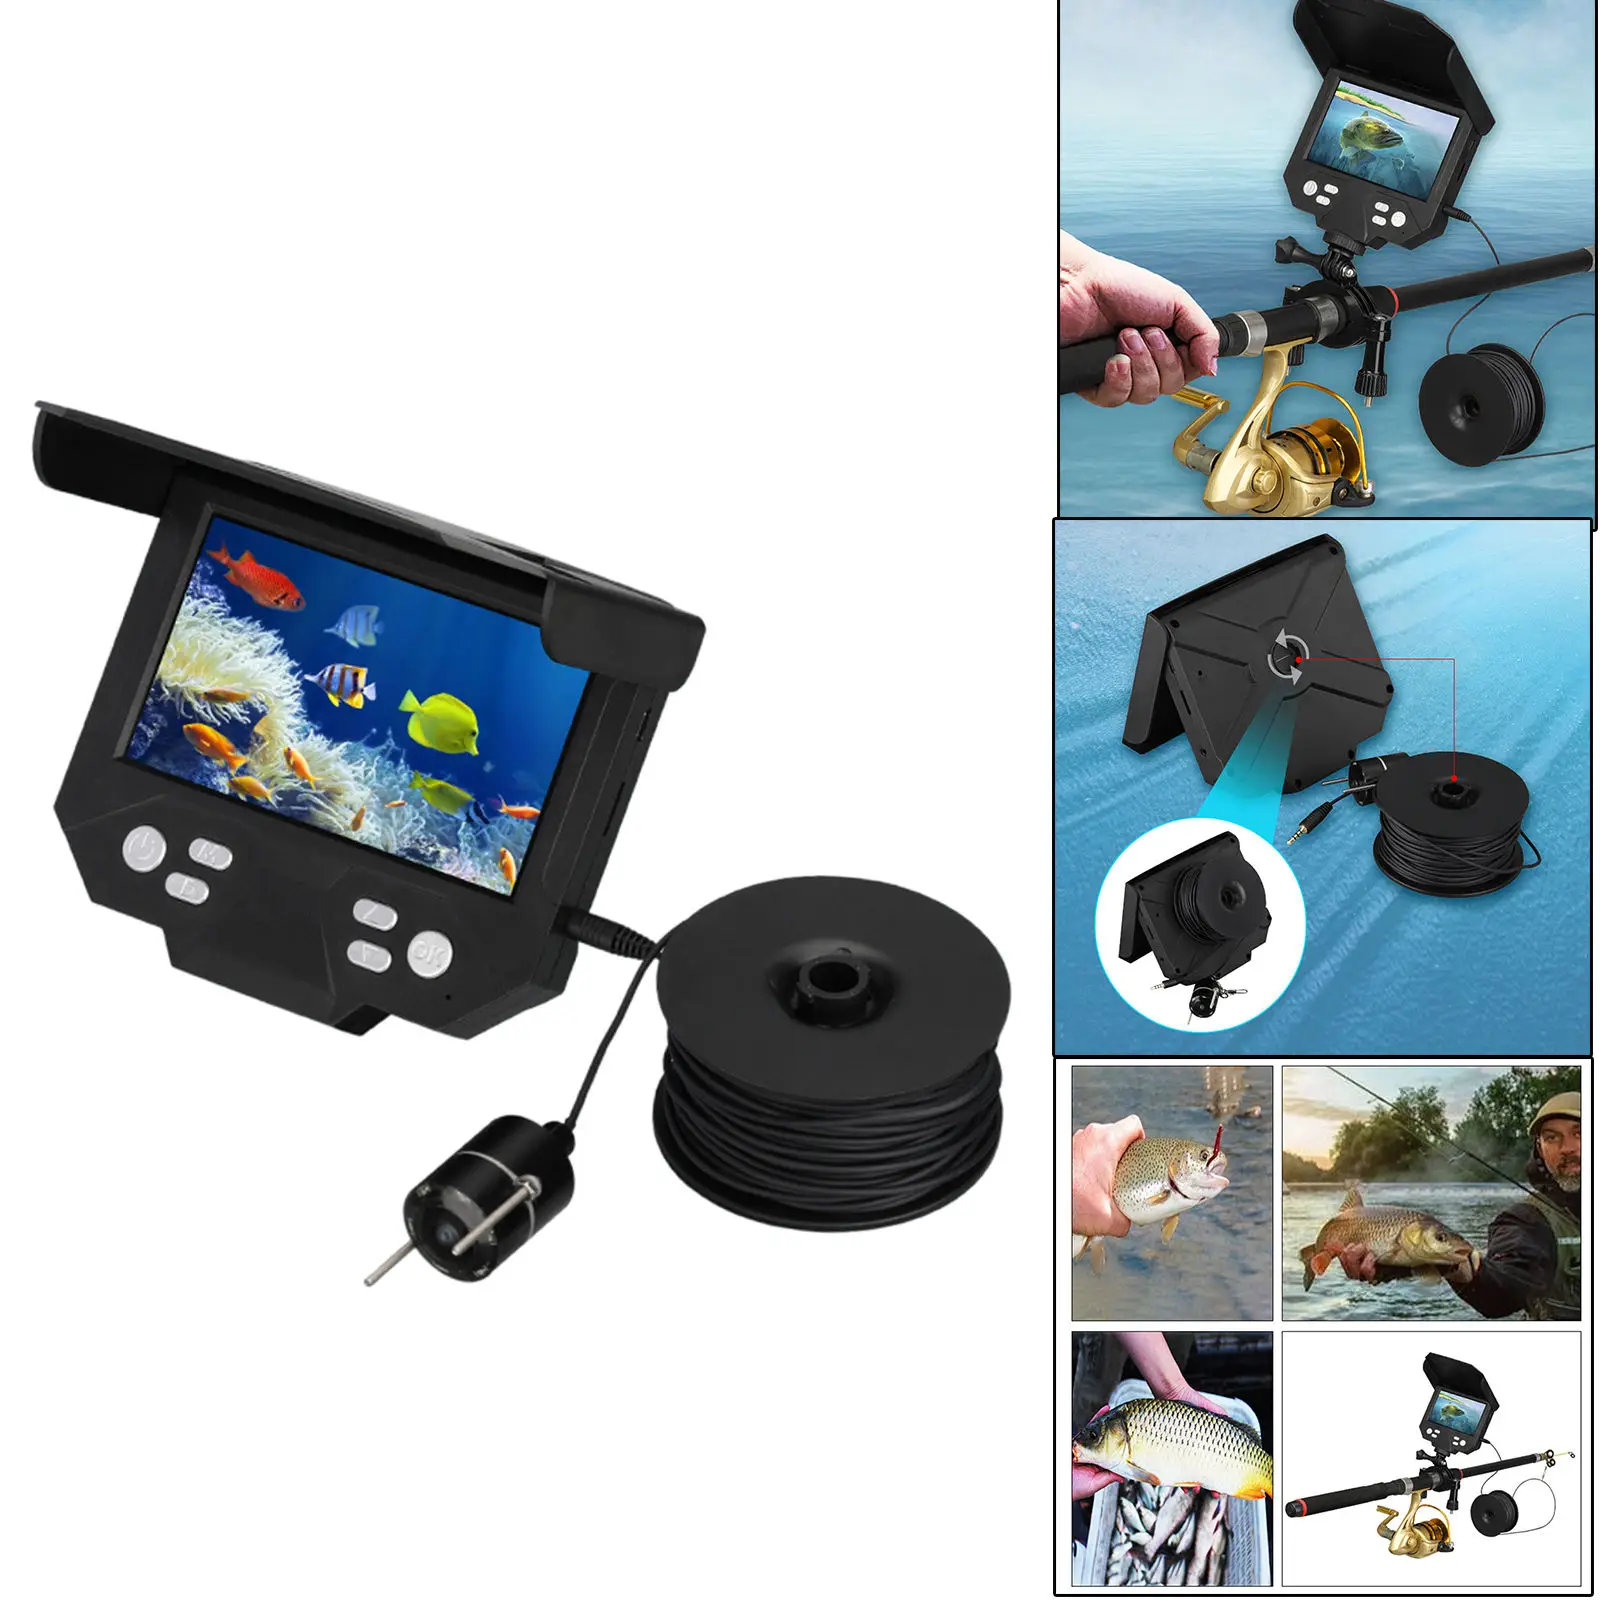 Fish Finder Camera, 4.3inch LCD Monitor, 30M Depth, Tackles Infrared LED Light Night Visible Underwater Fishing Detector